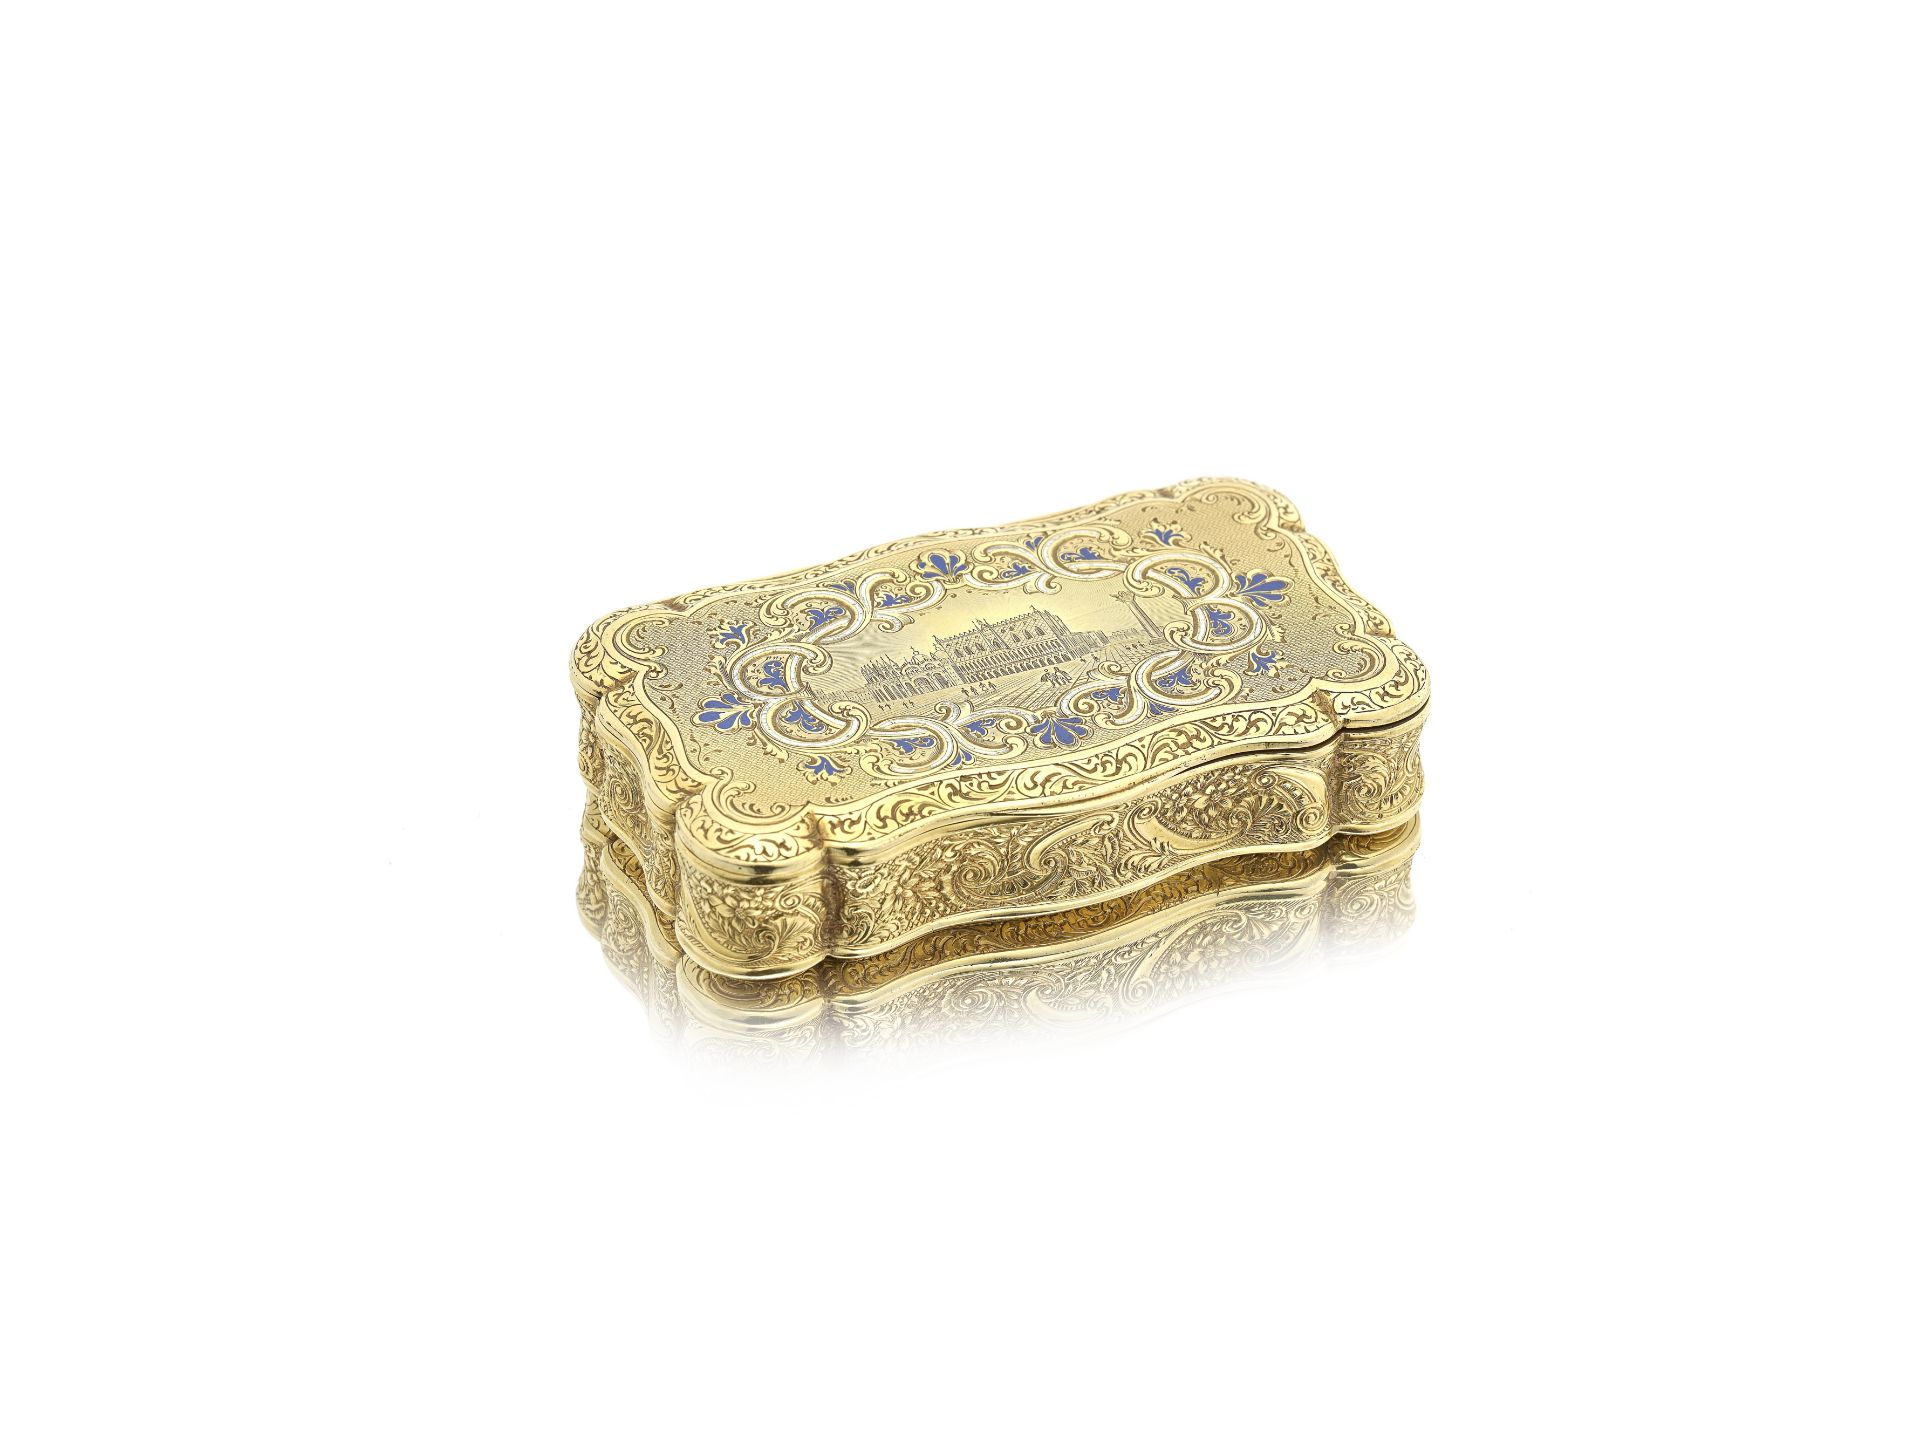 A 19th century gold and enamel box unmarked, possibly Italian